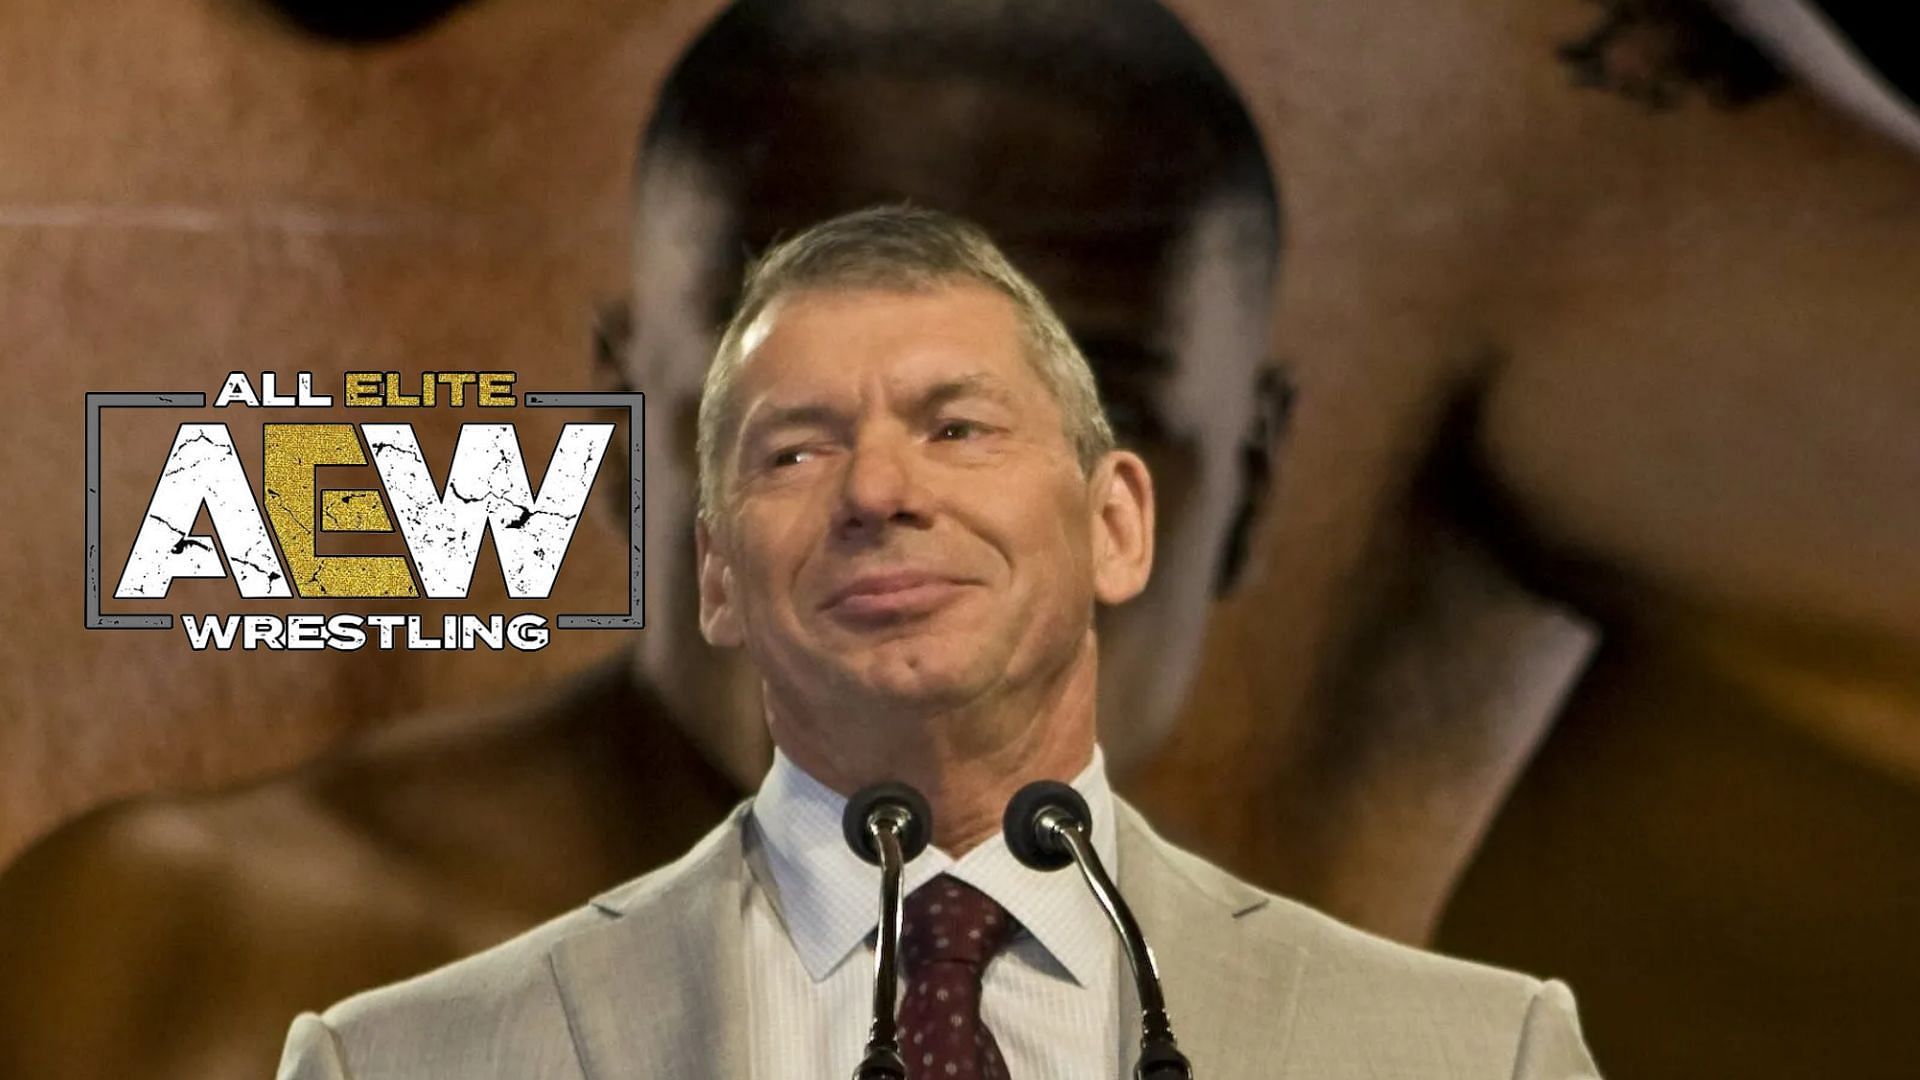 A wrestling veteran talked about how Vince McMahon would